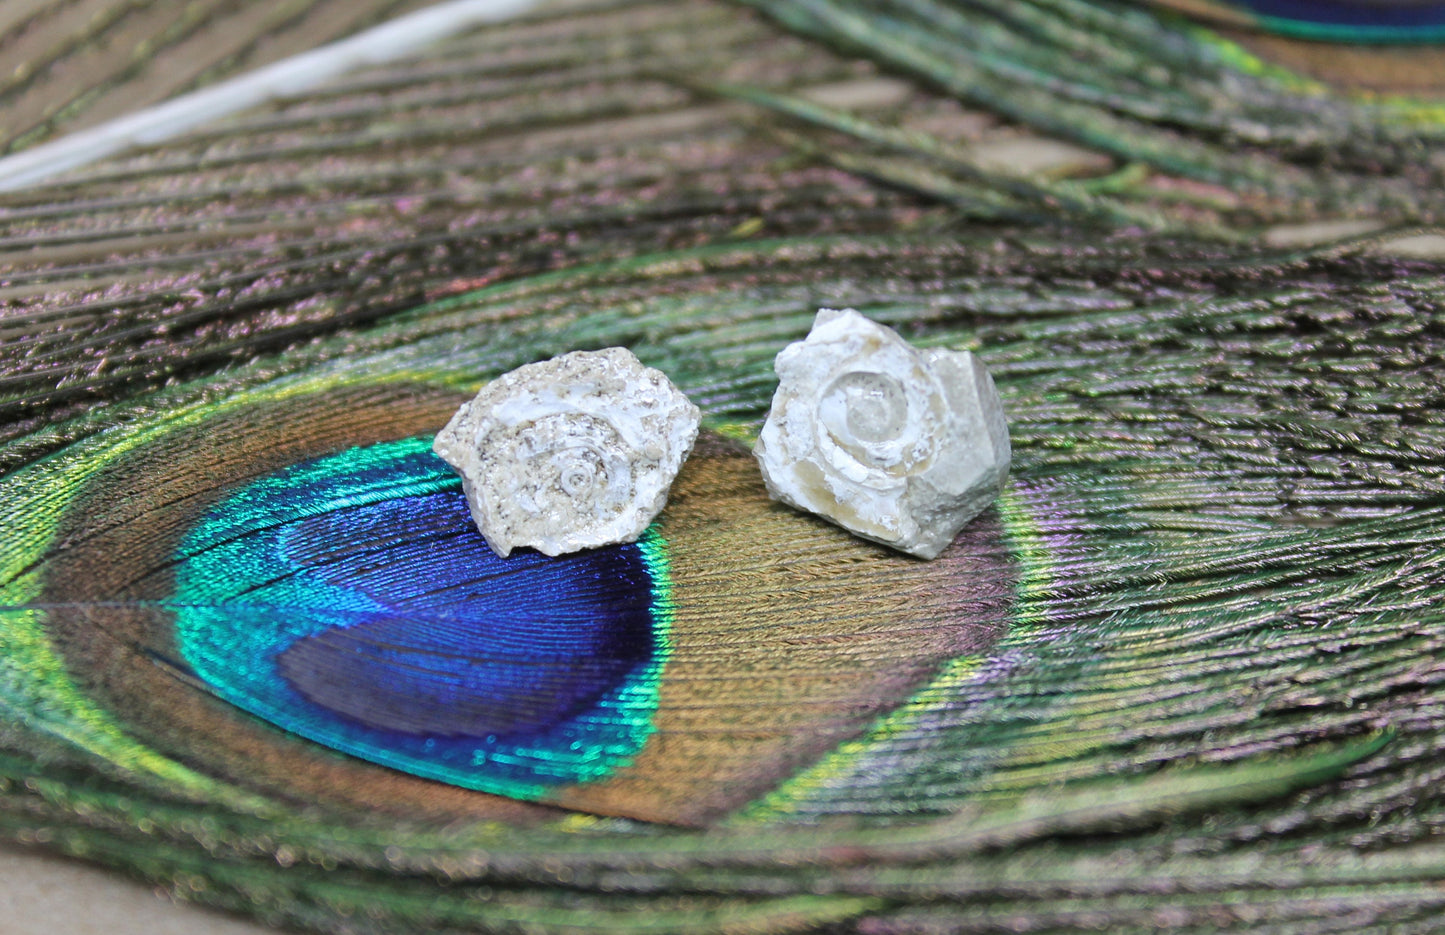 Wyoming Shell Fossil Earring Stud